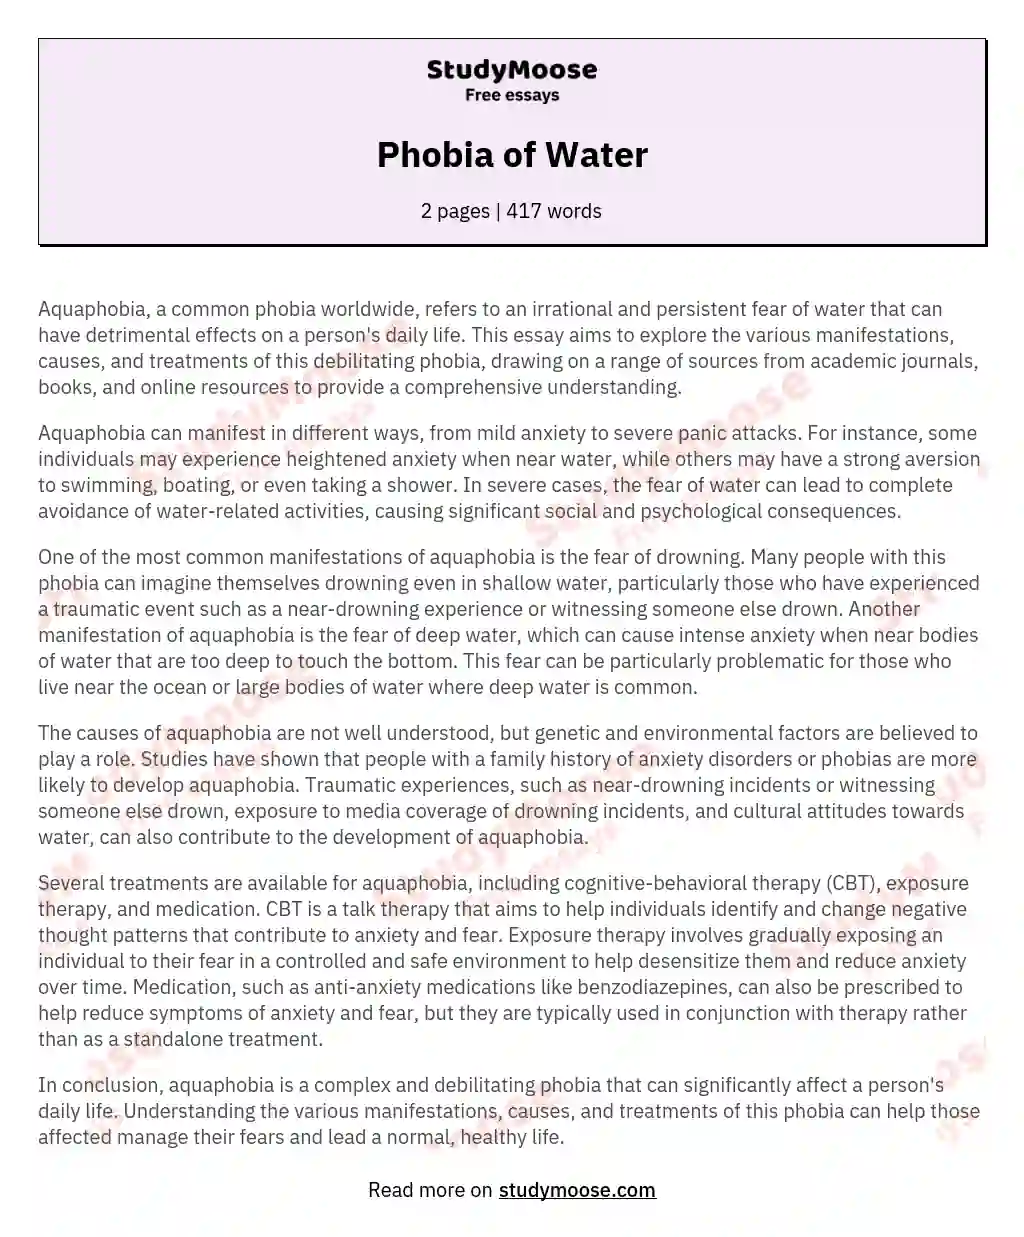 Phobia of Water essay